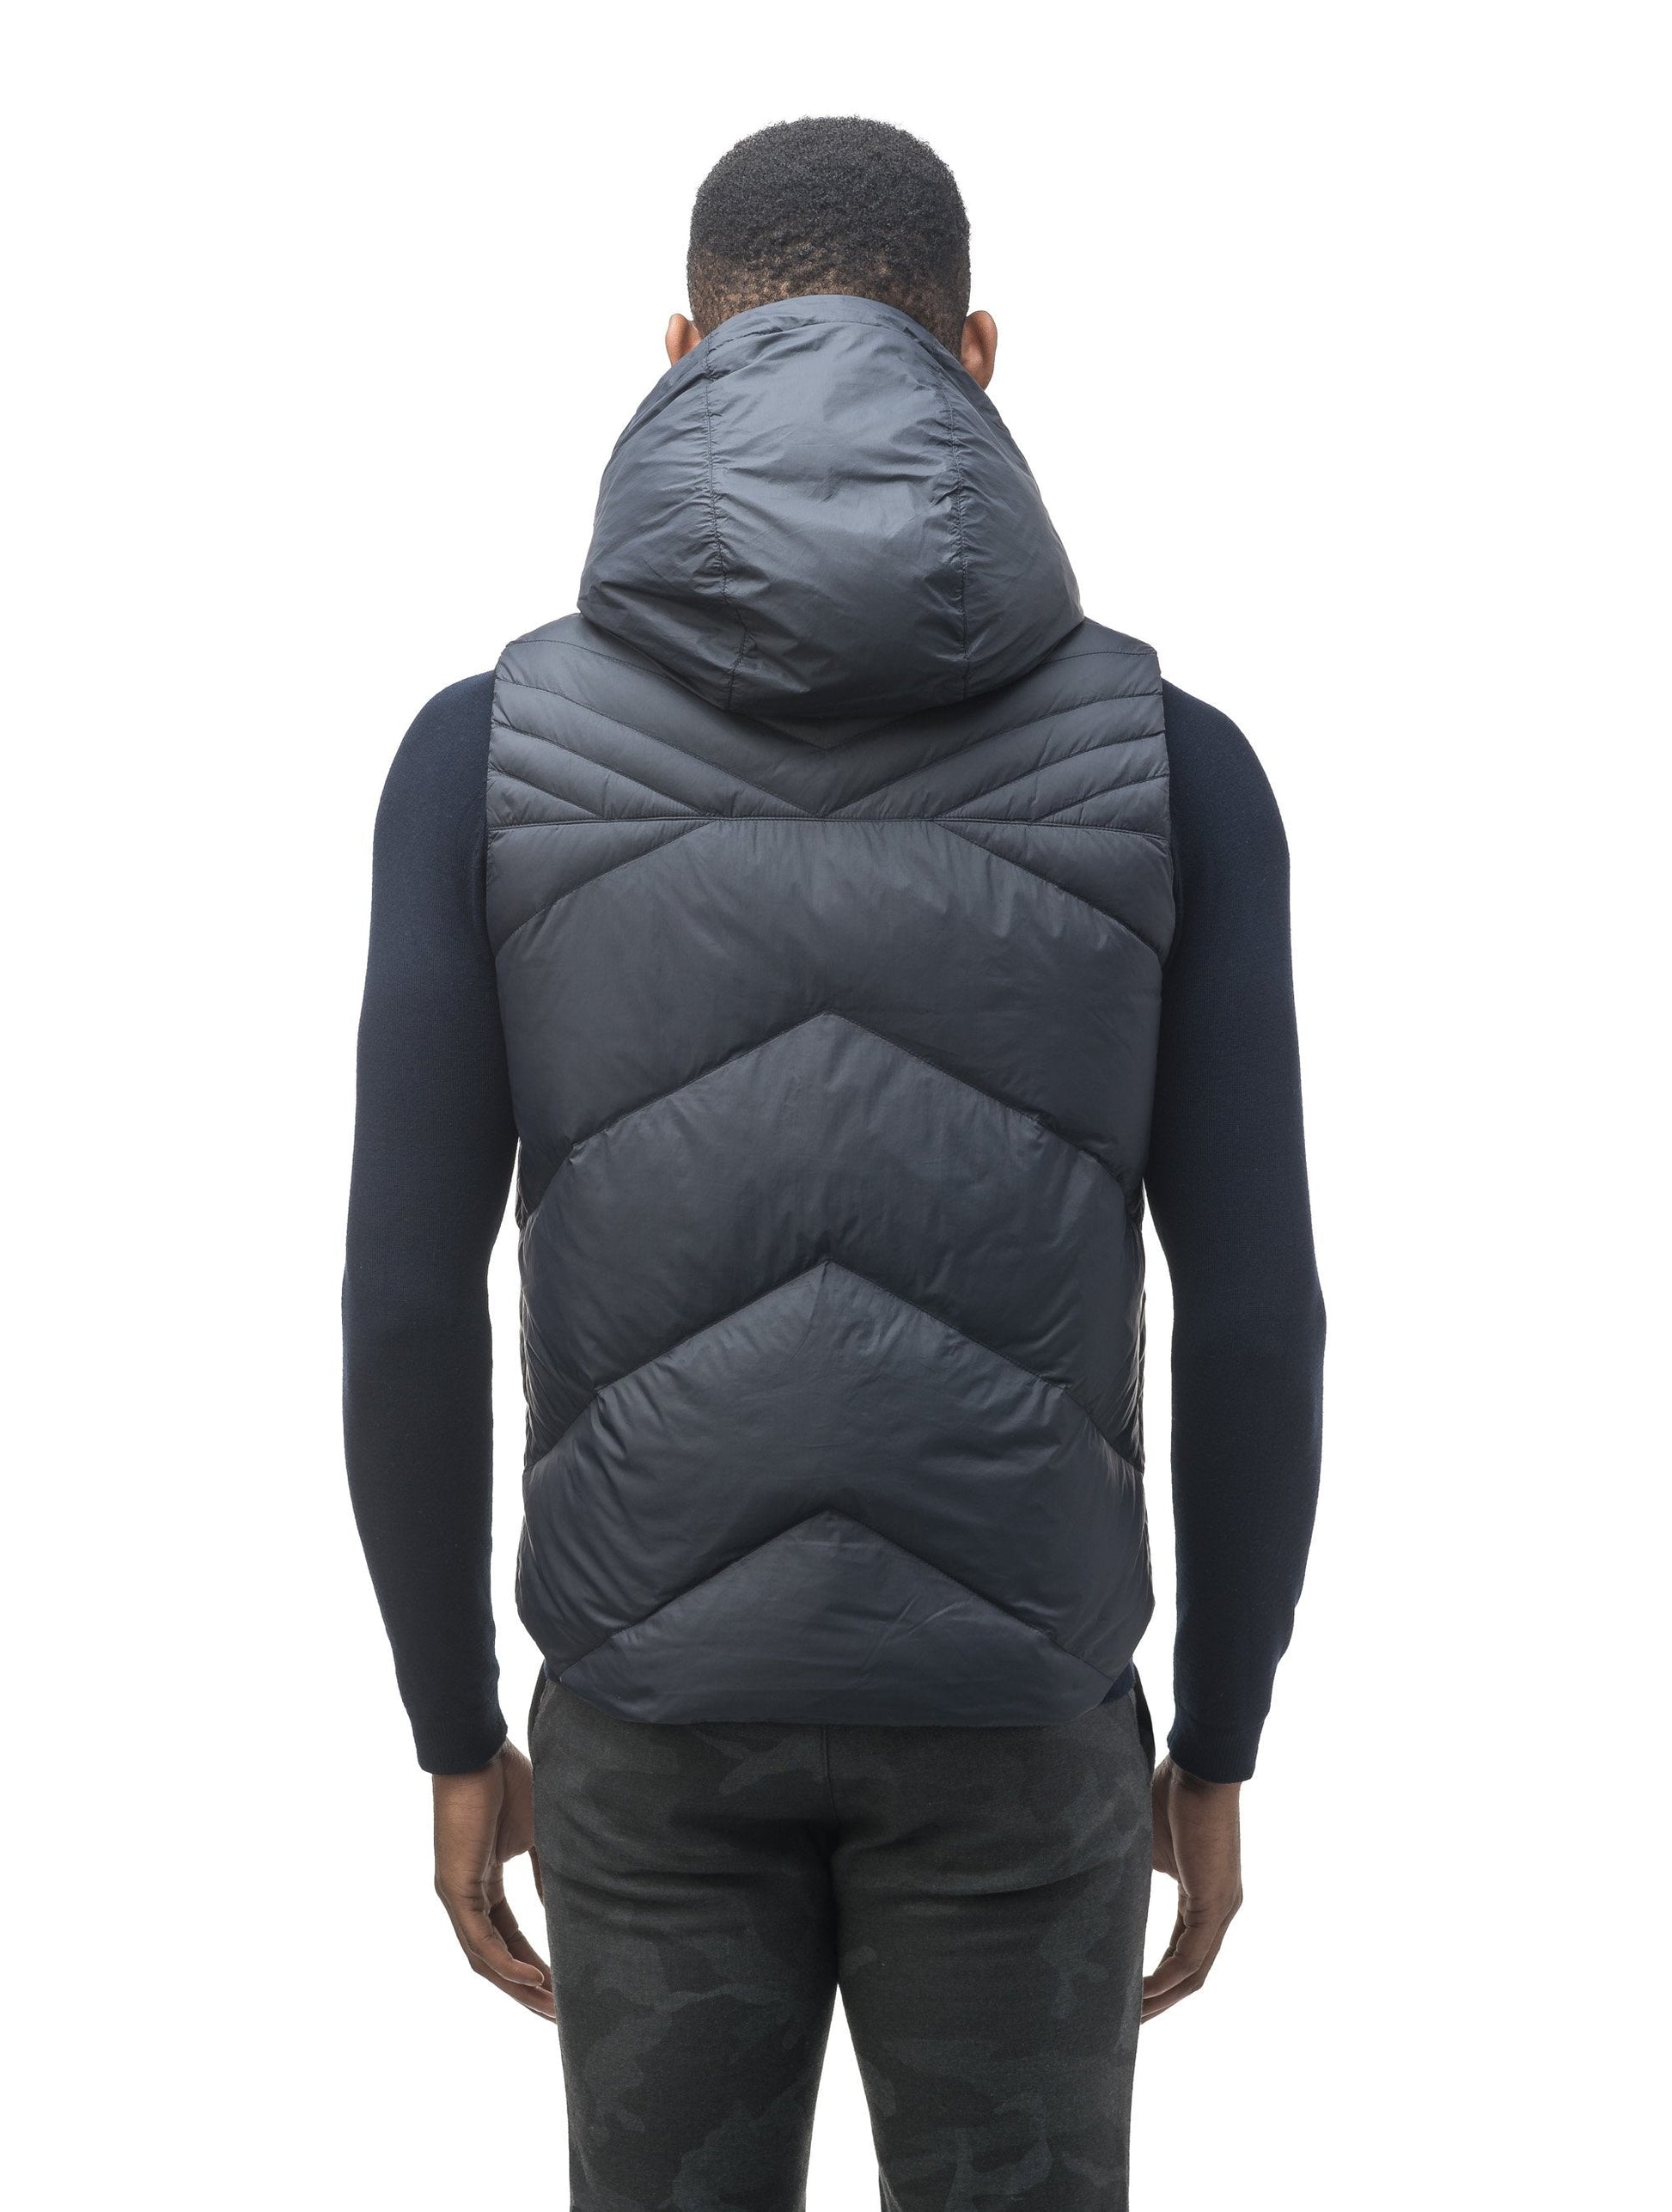 Men's lightweight vest with accents like our removable hood and chevron quilting in Navy